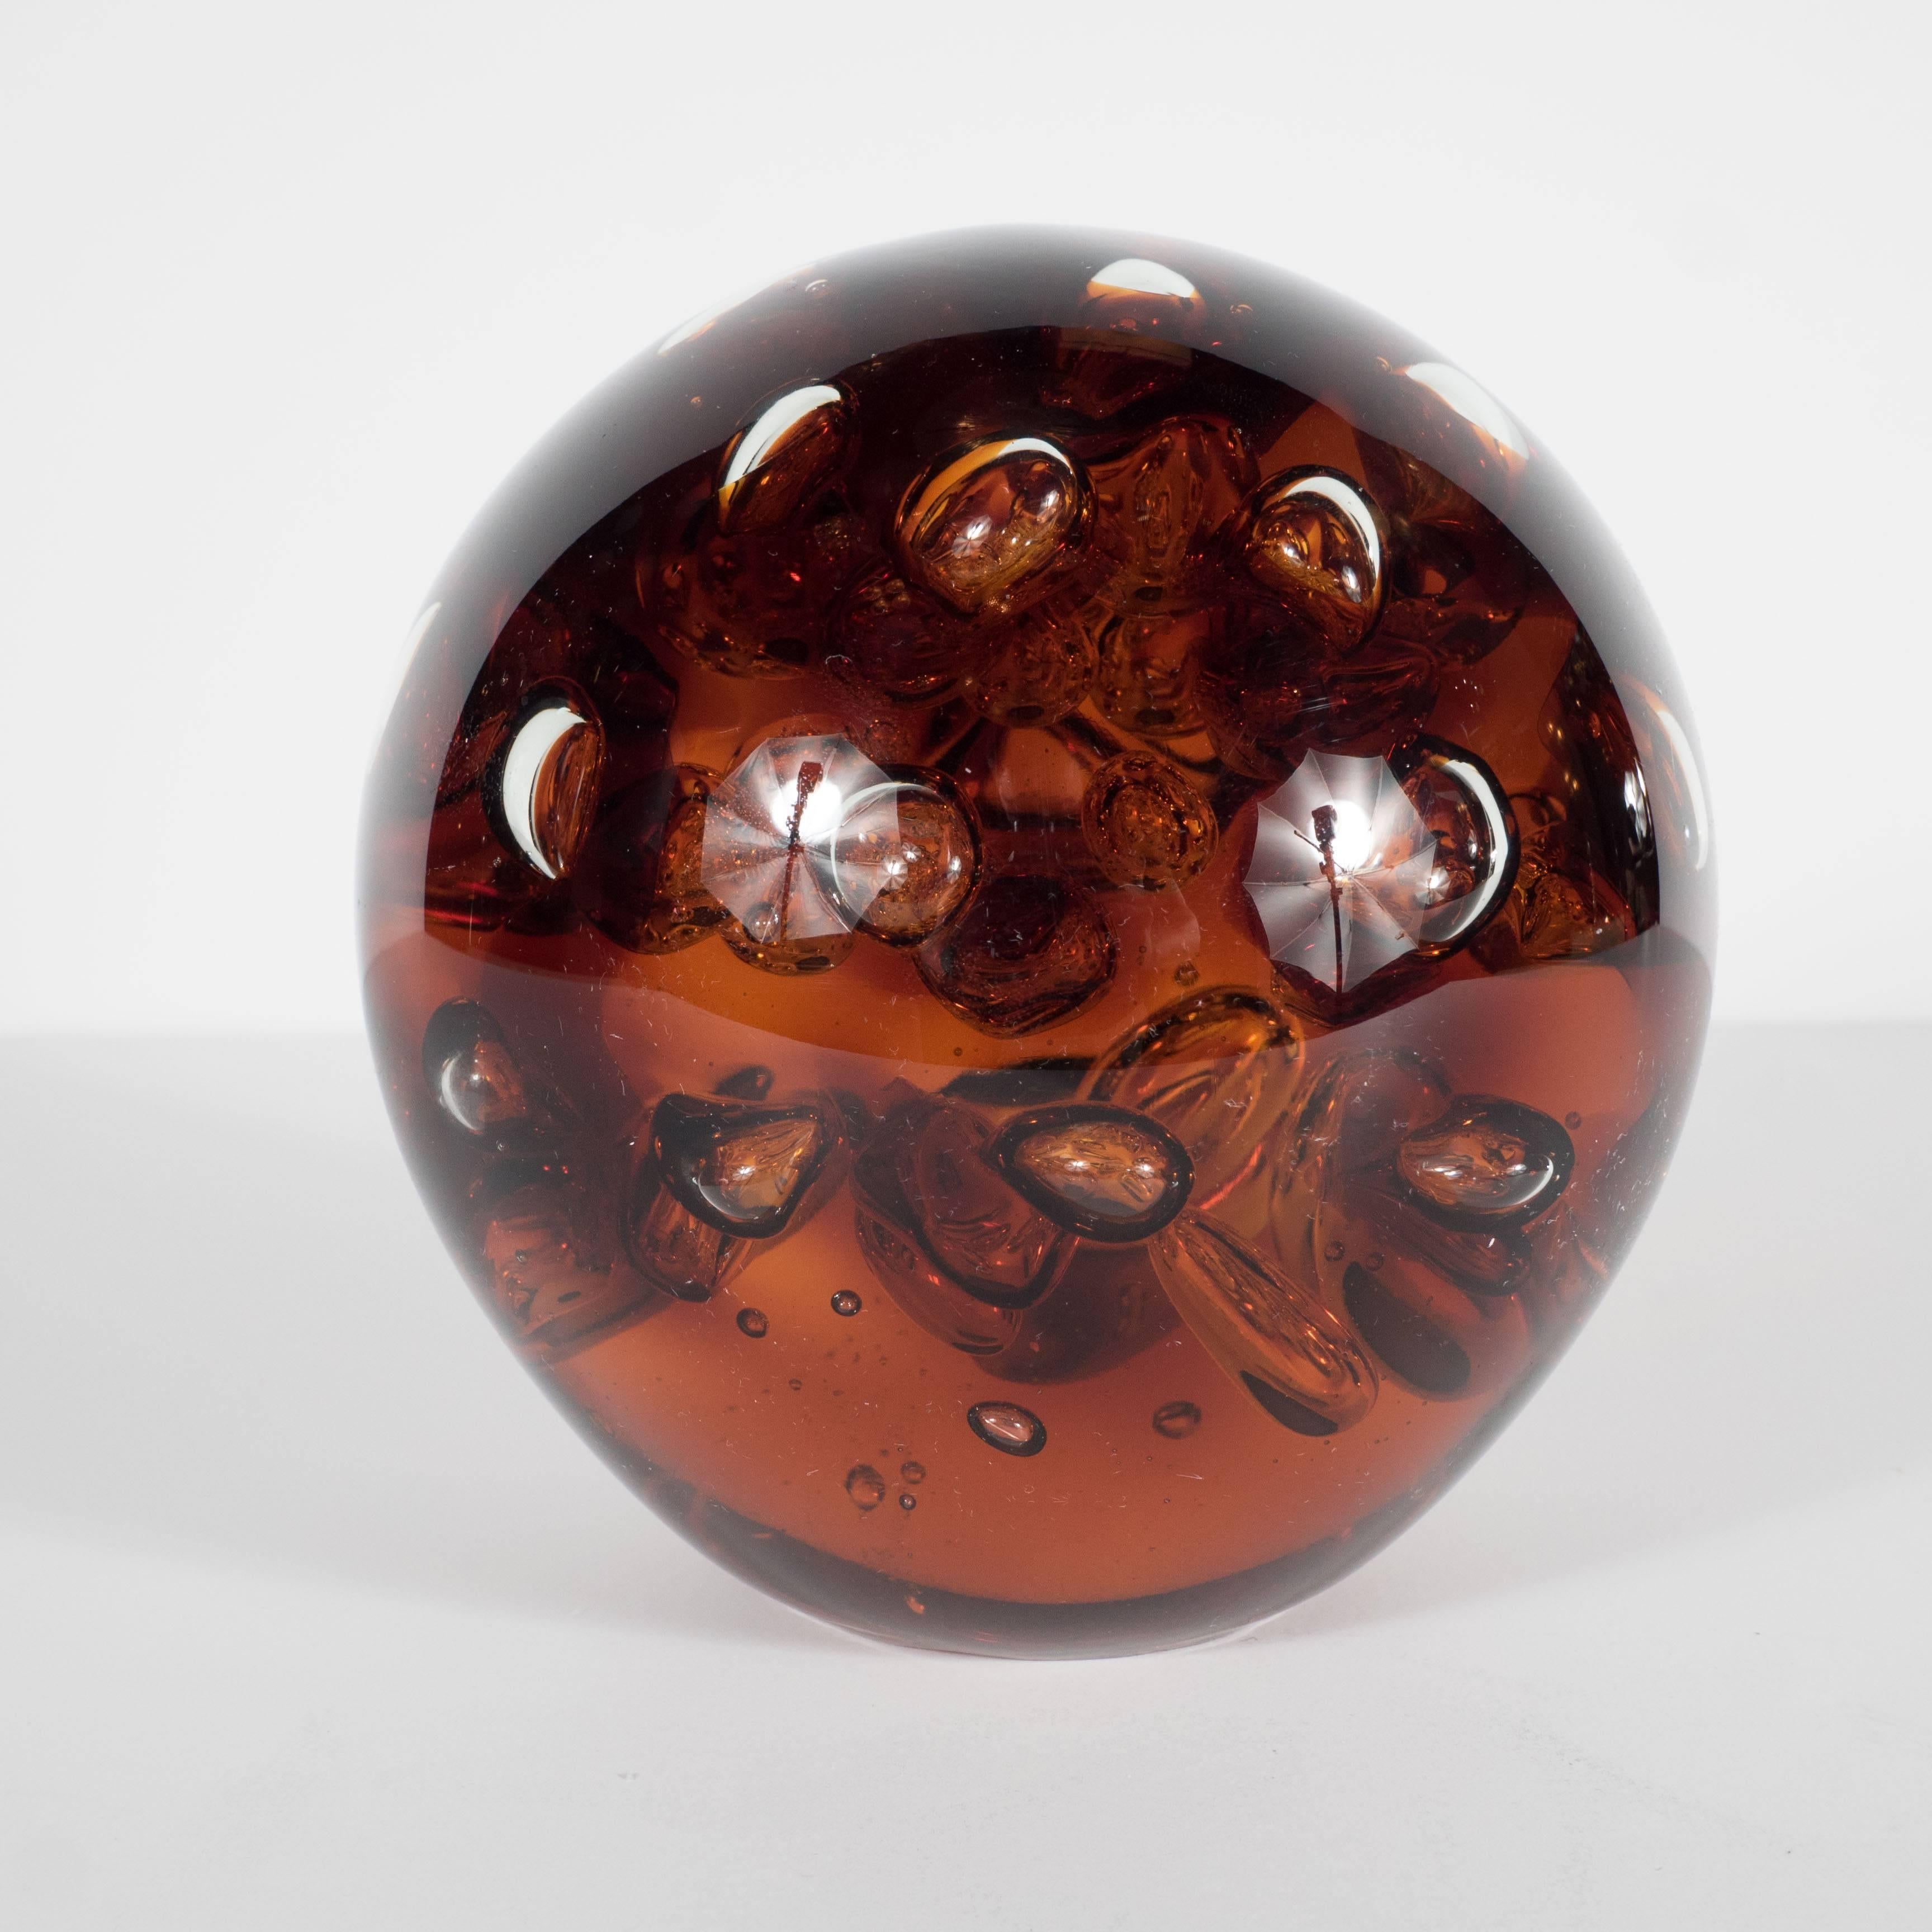 A Mid-Century controlled bubble amber colored glass object. A lovely piece on its own, as a paperweight or part of a set of decorative accessories. Would be wonderful on a book case or cocktail table. It is in excellent condition.